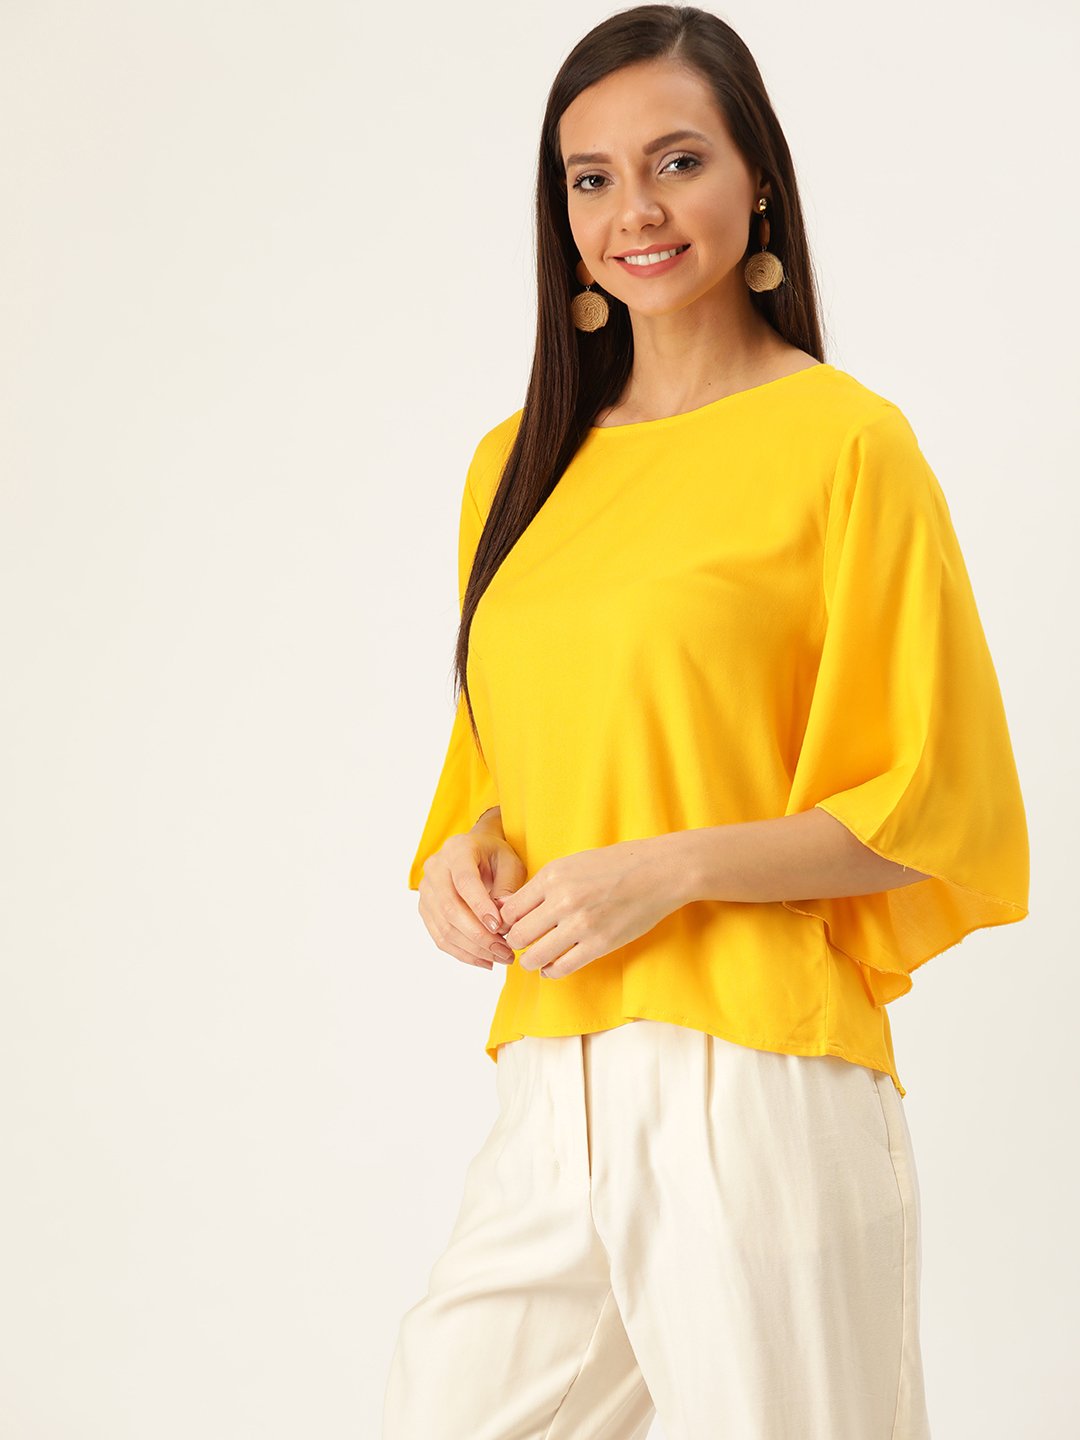 Yellow Top With Black Stole